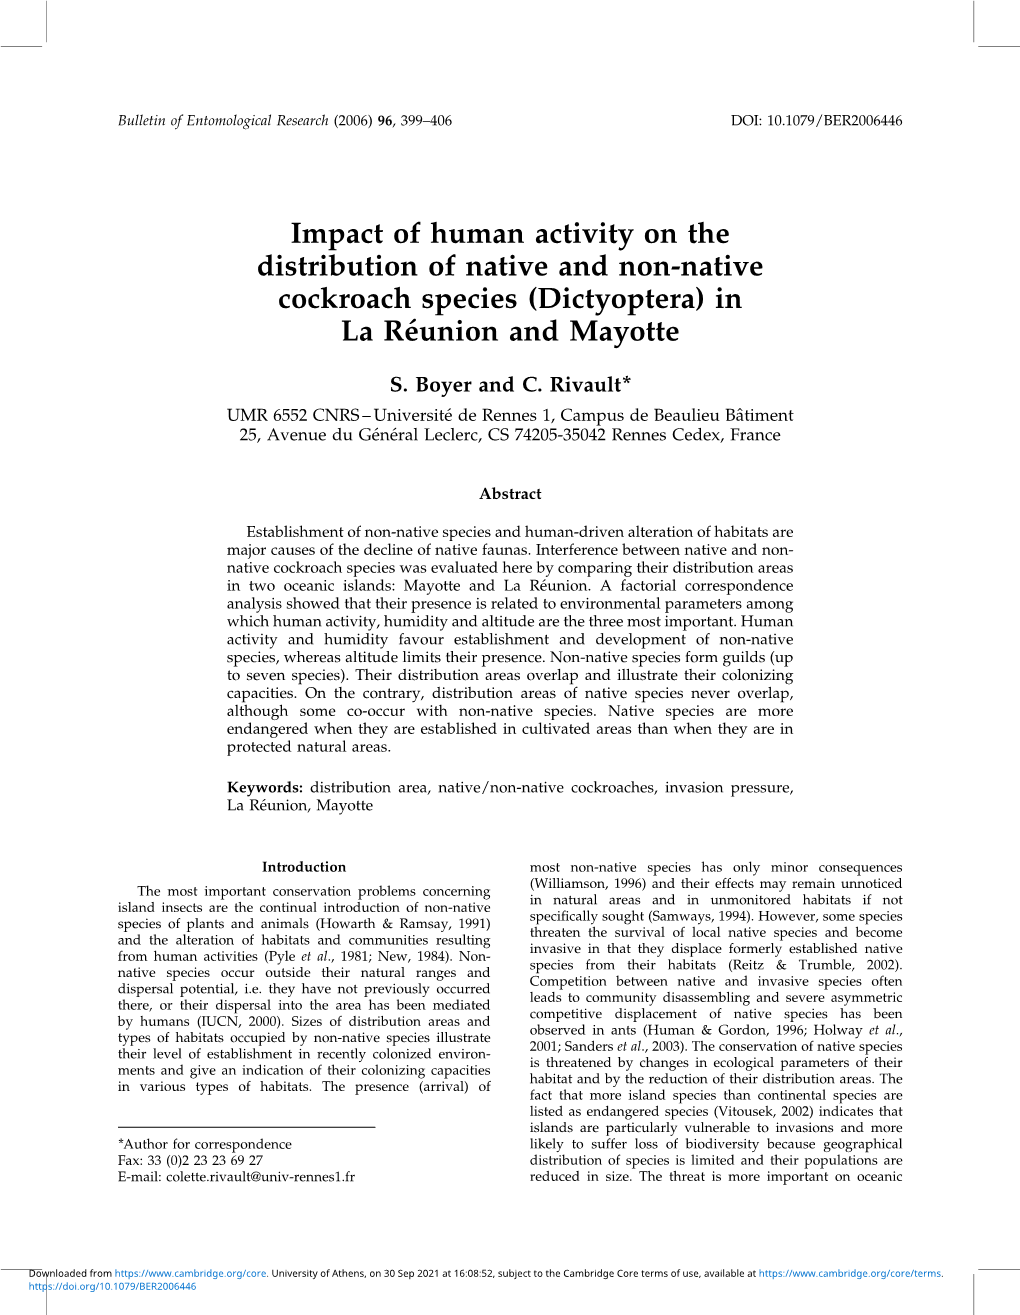 Impact of Human Activity on the Distribution of Native and Non-Native Cockroach Species (Dictyoptera) in La Re´Union and Mayotte